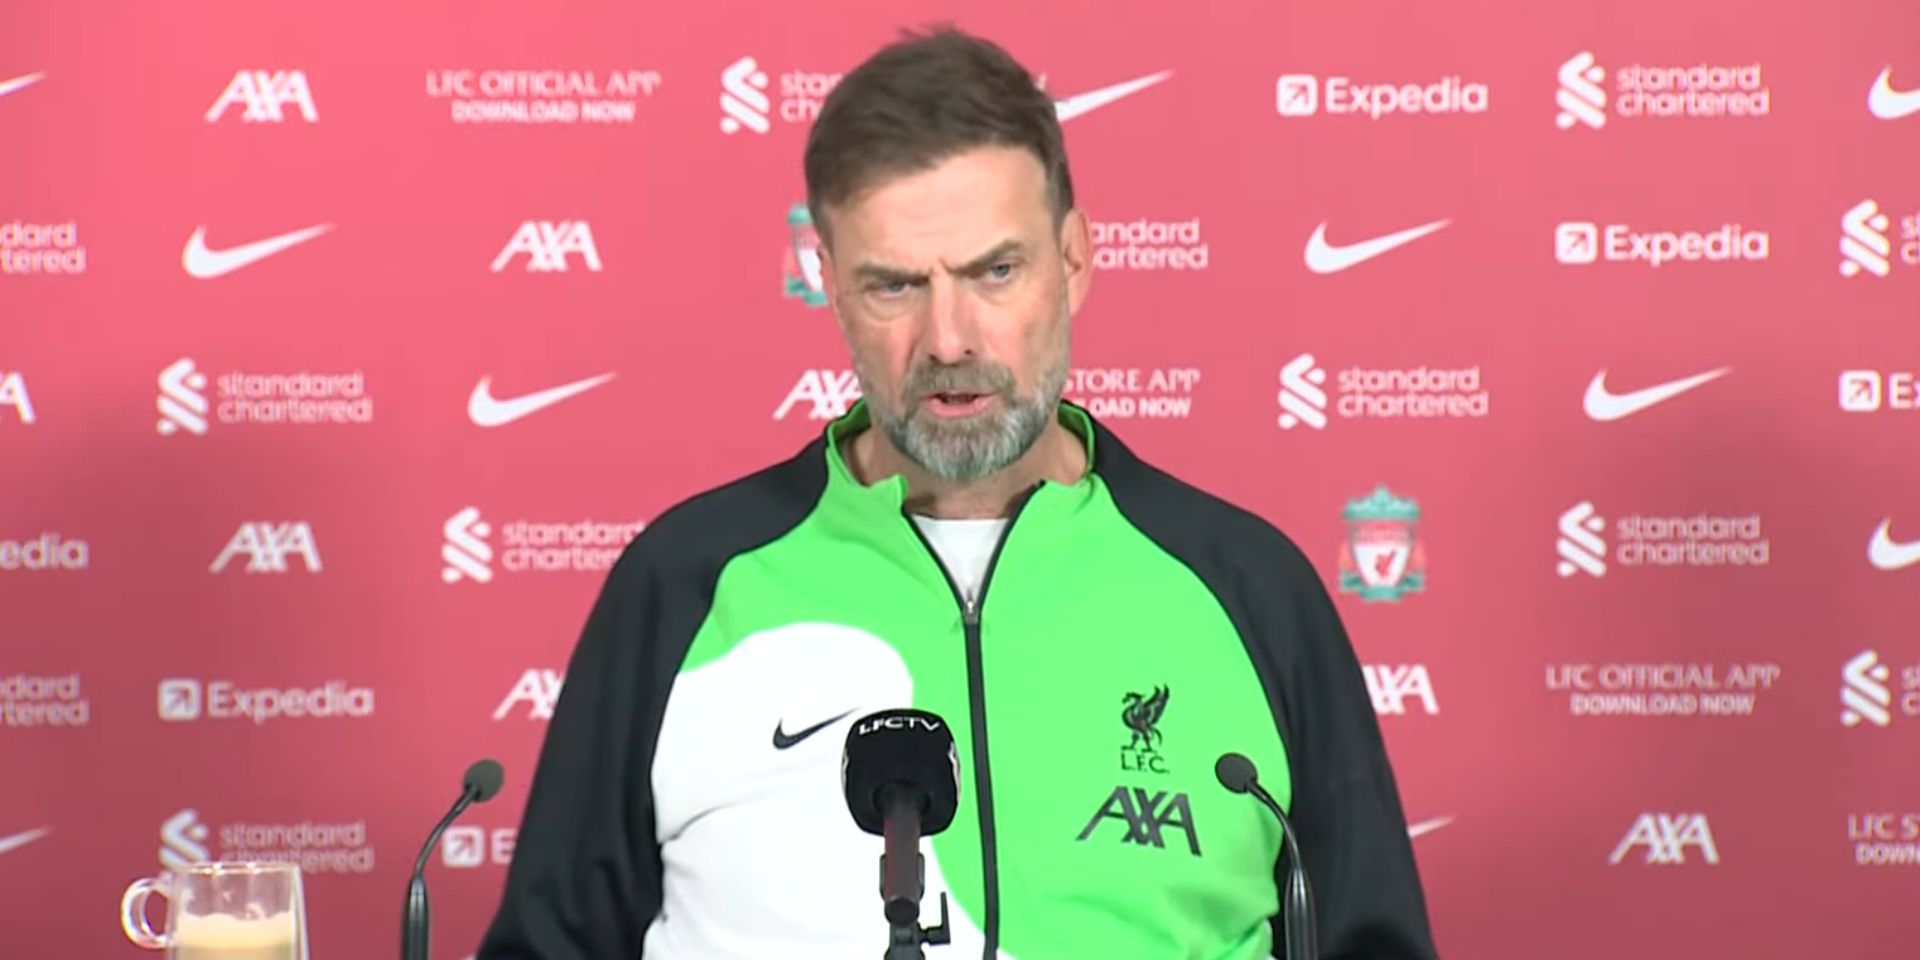 (Video) At last; Klopp confirms injured option is back ‘in contention’ for Sheff Utd game